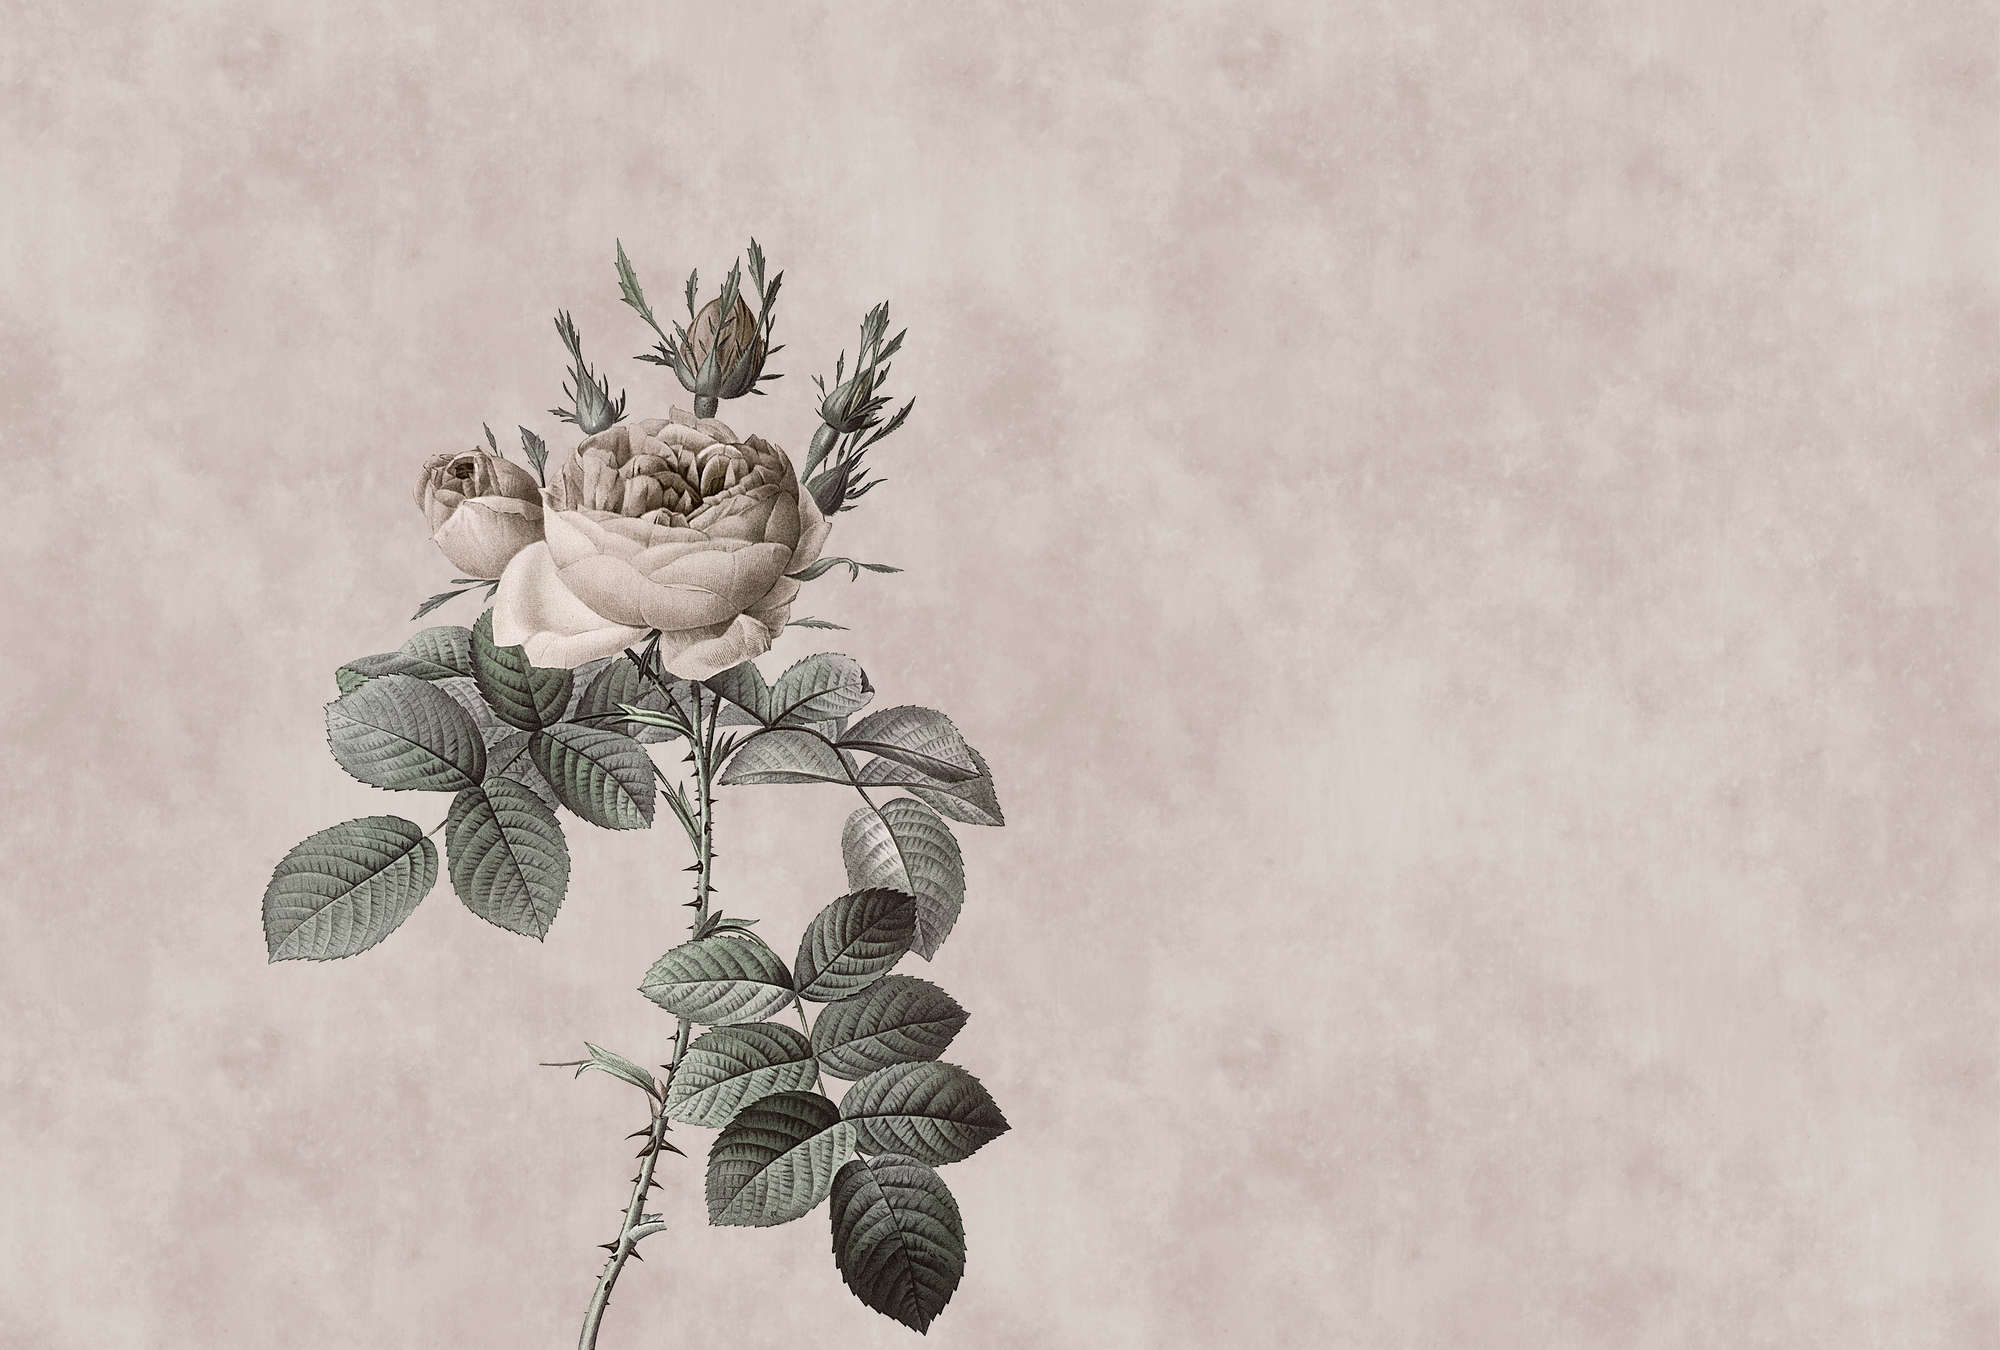             Photo wallpaper with rose in drawing style - Walls by Patel
        